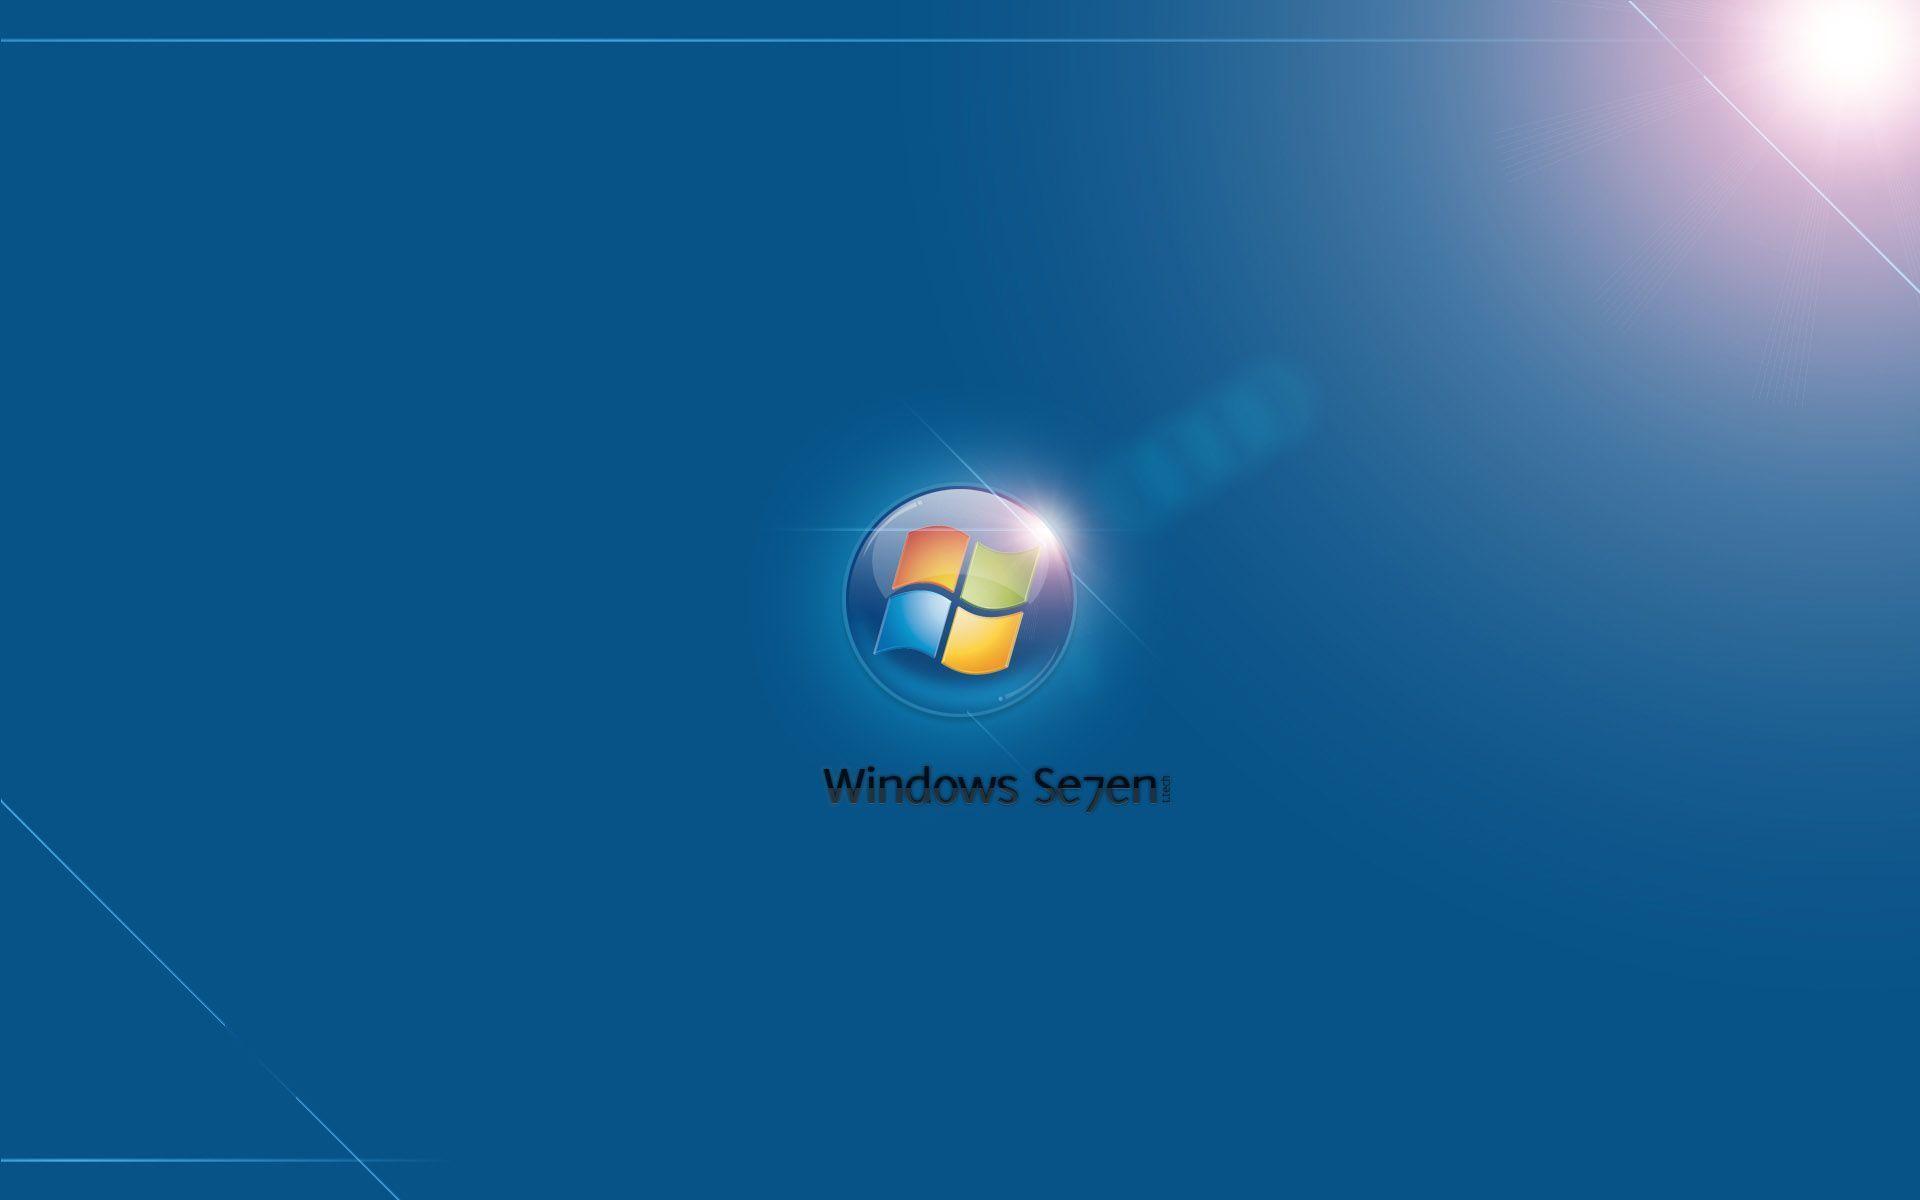 Microsoft Windows 7 wallpaper and image, picture